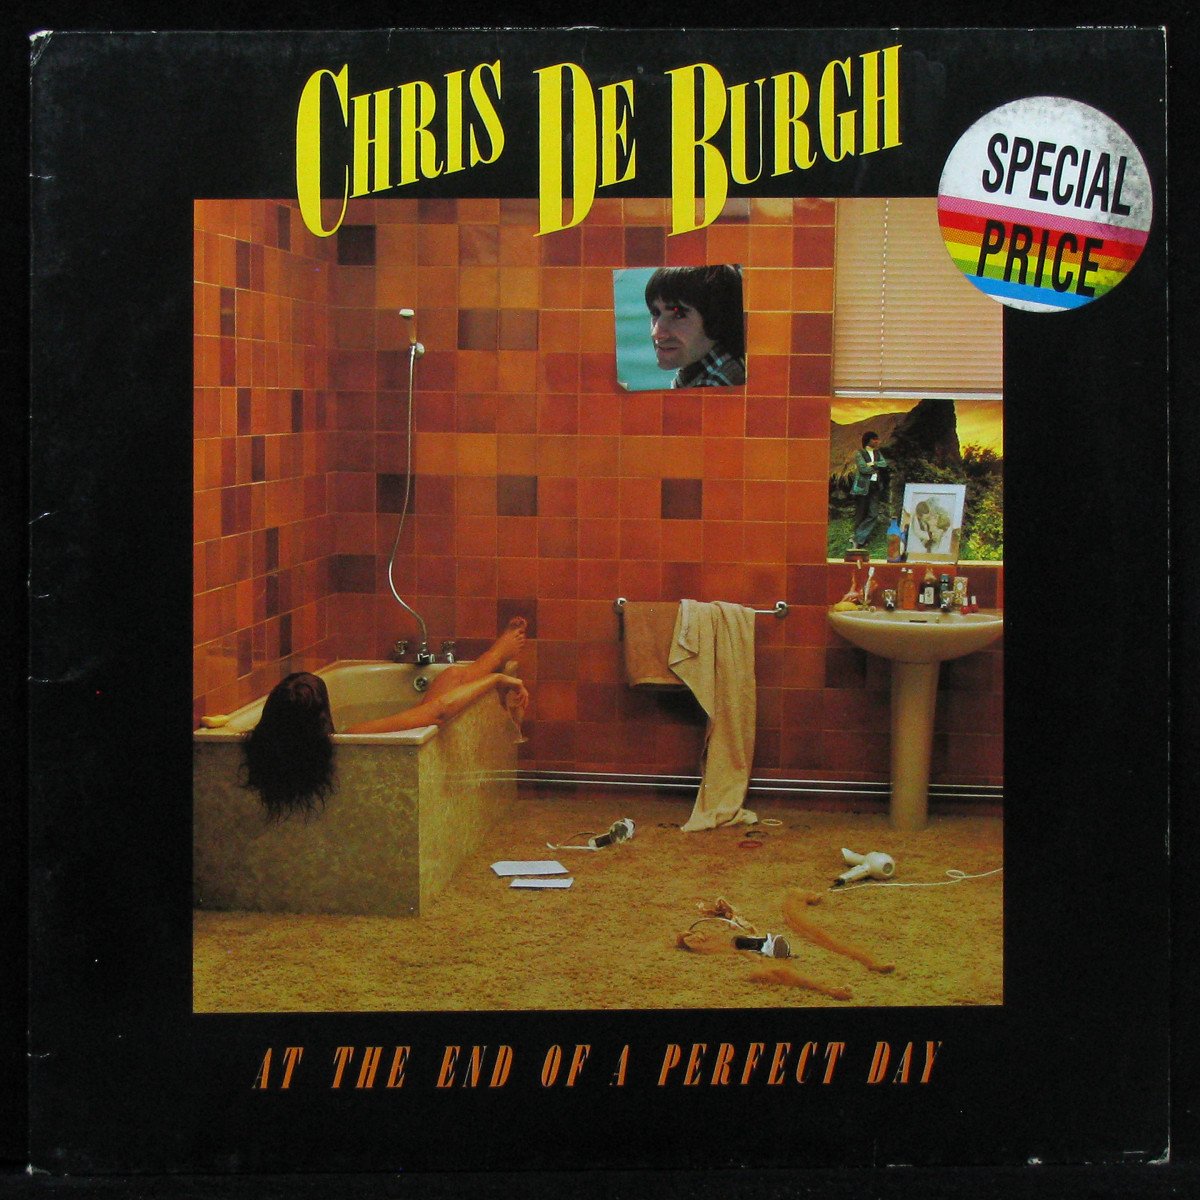 LP Chris De Burgh — At The End Of A Perfect Day фото